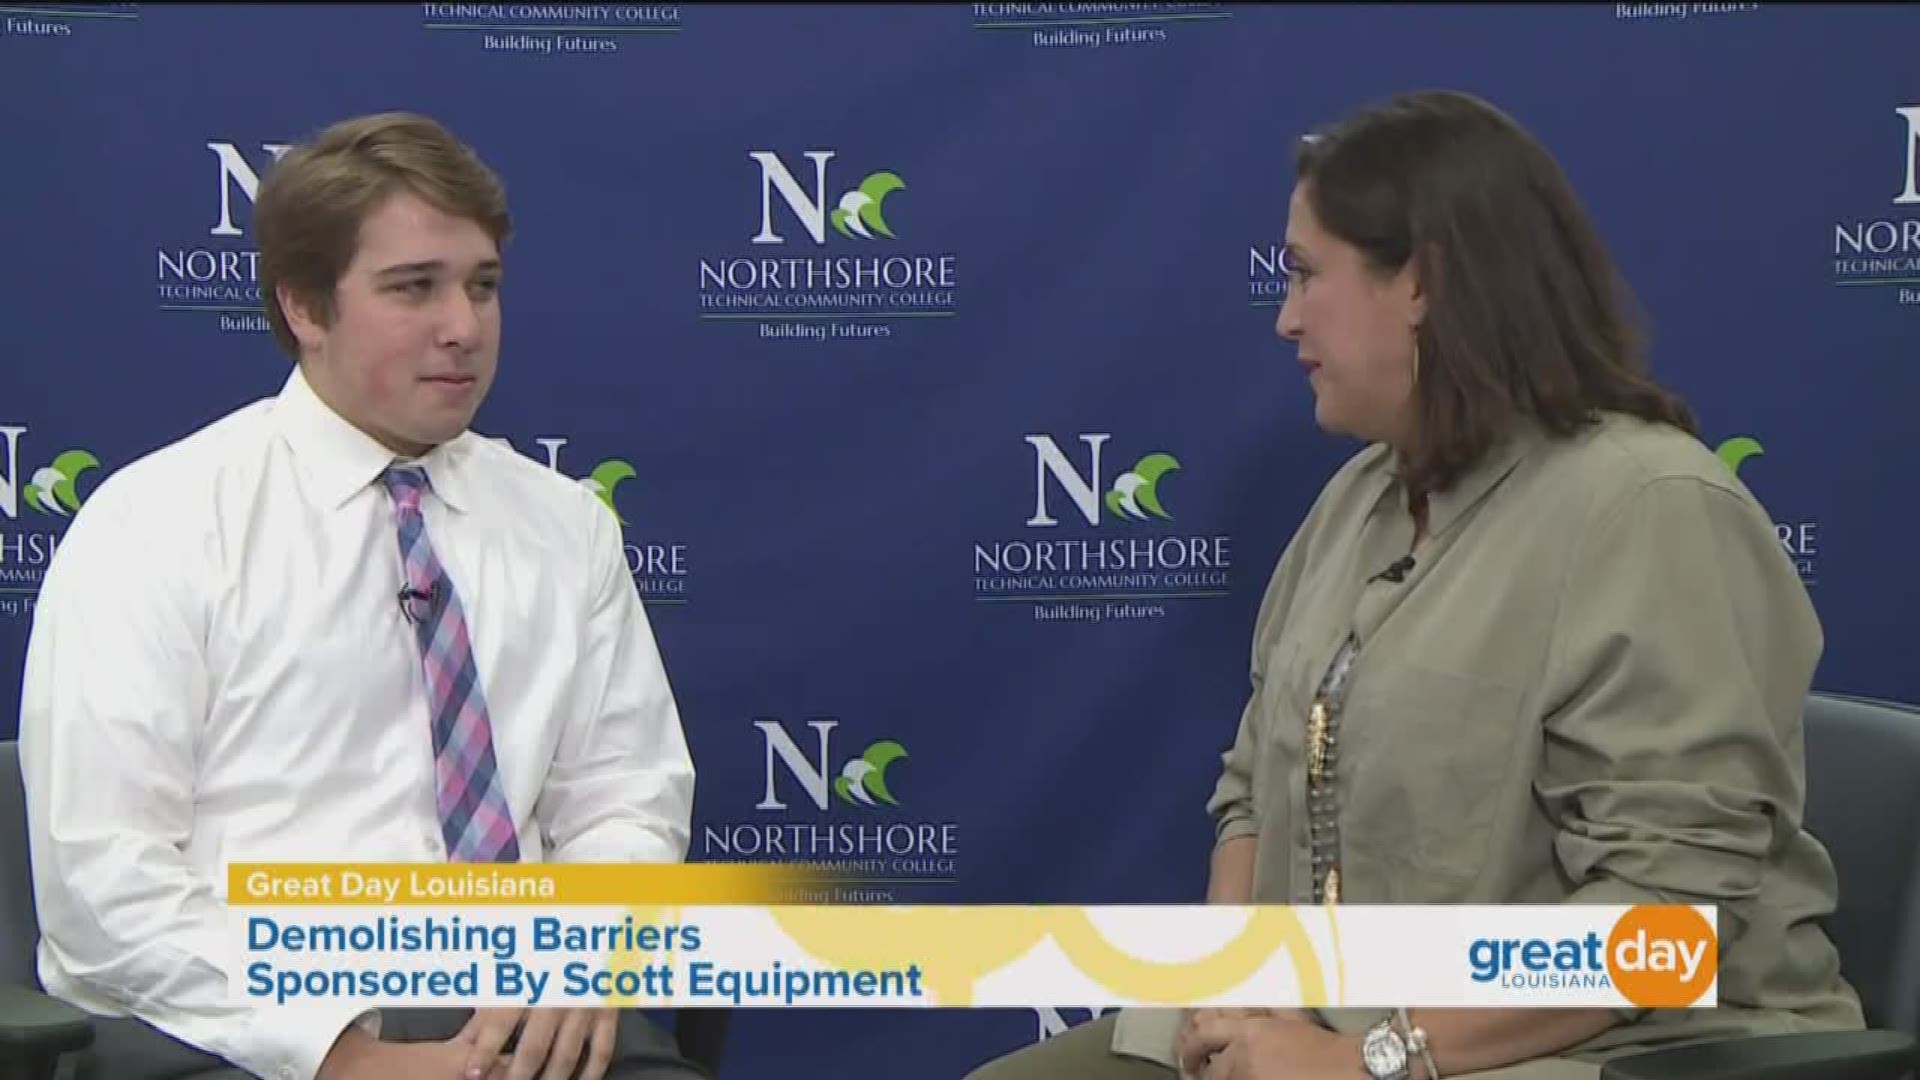 On this Demolishing Barriers, Simone talks with Brayden Goodreau about a career path that put him in the Maritime Technology Program at Northshore Tech.